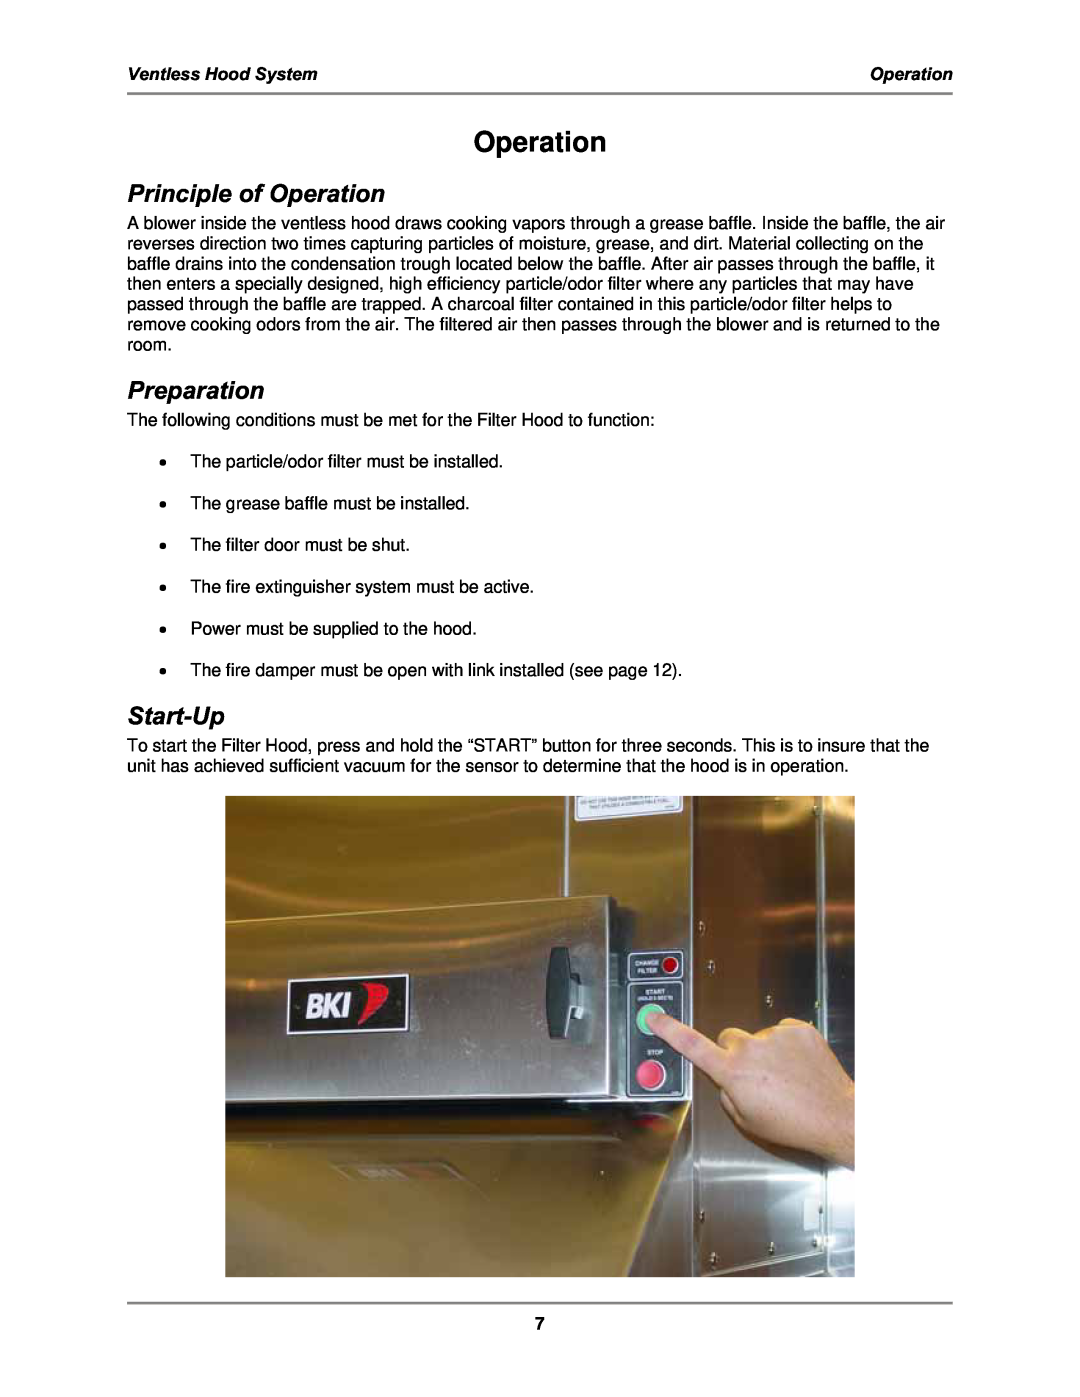 Bakers Pride Oven FH-28 operation manual Principle of Operation, Preparation, Start-Up, Ventless Hood System 